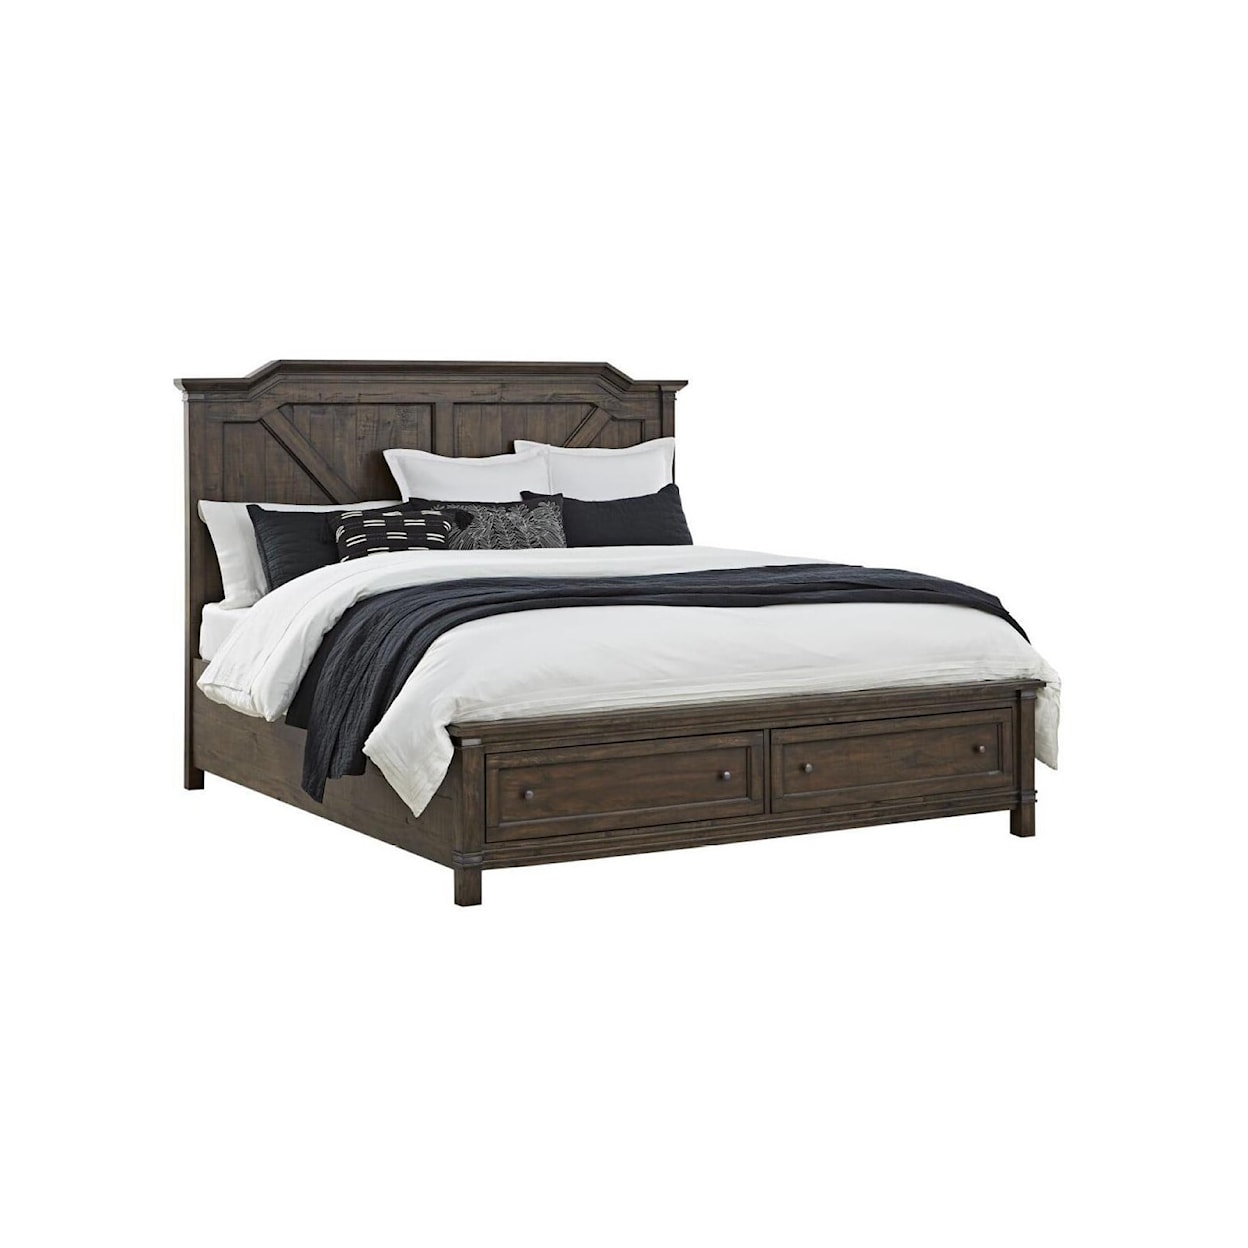 American Woodcrafters Farmwood Queen Storage Bed